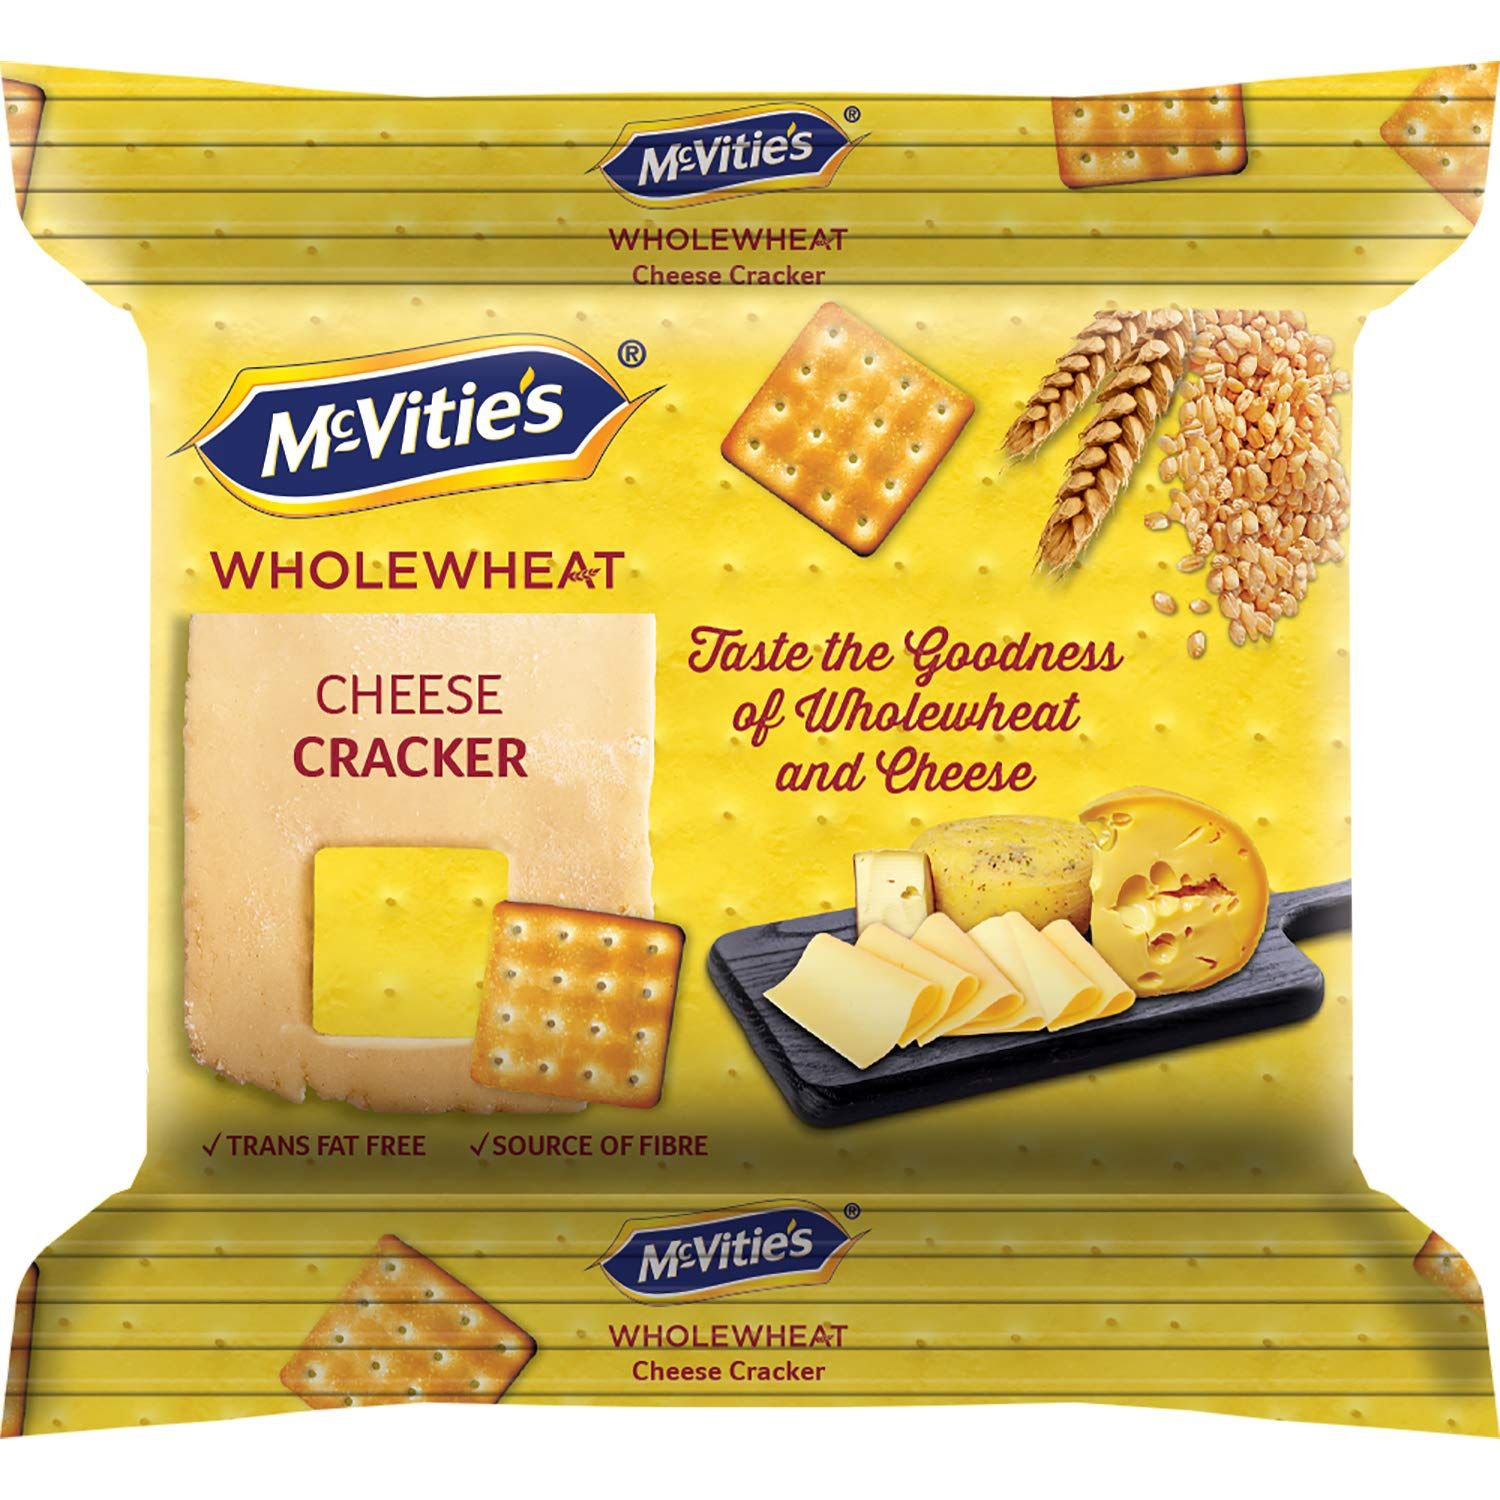 McVities Wholewheat Cheese Cracker Biscuits Image